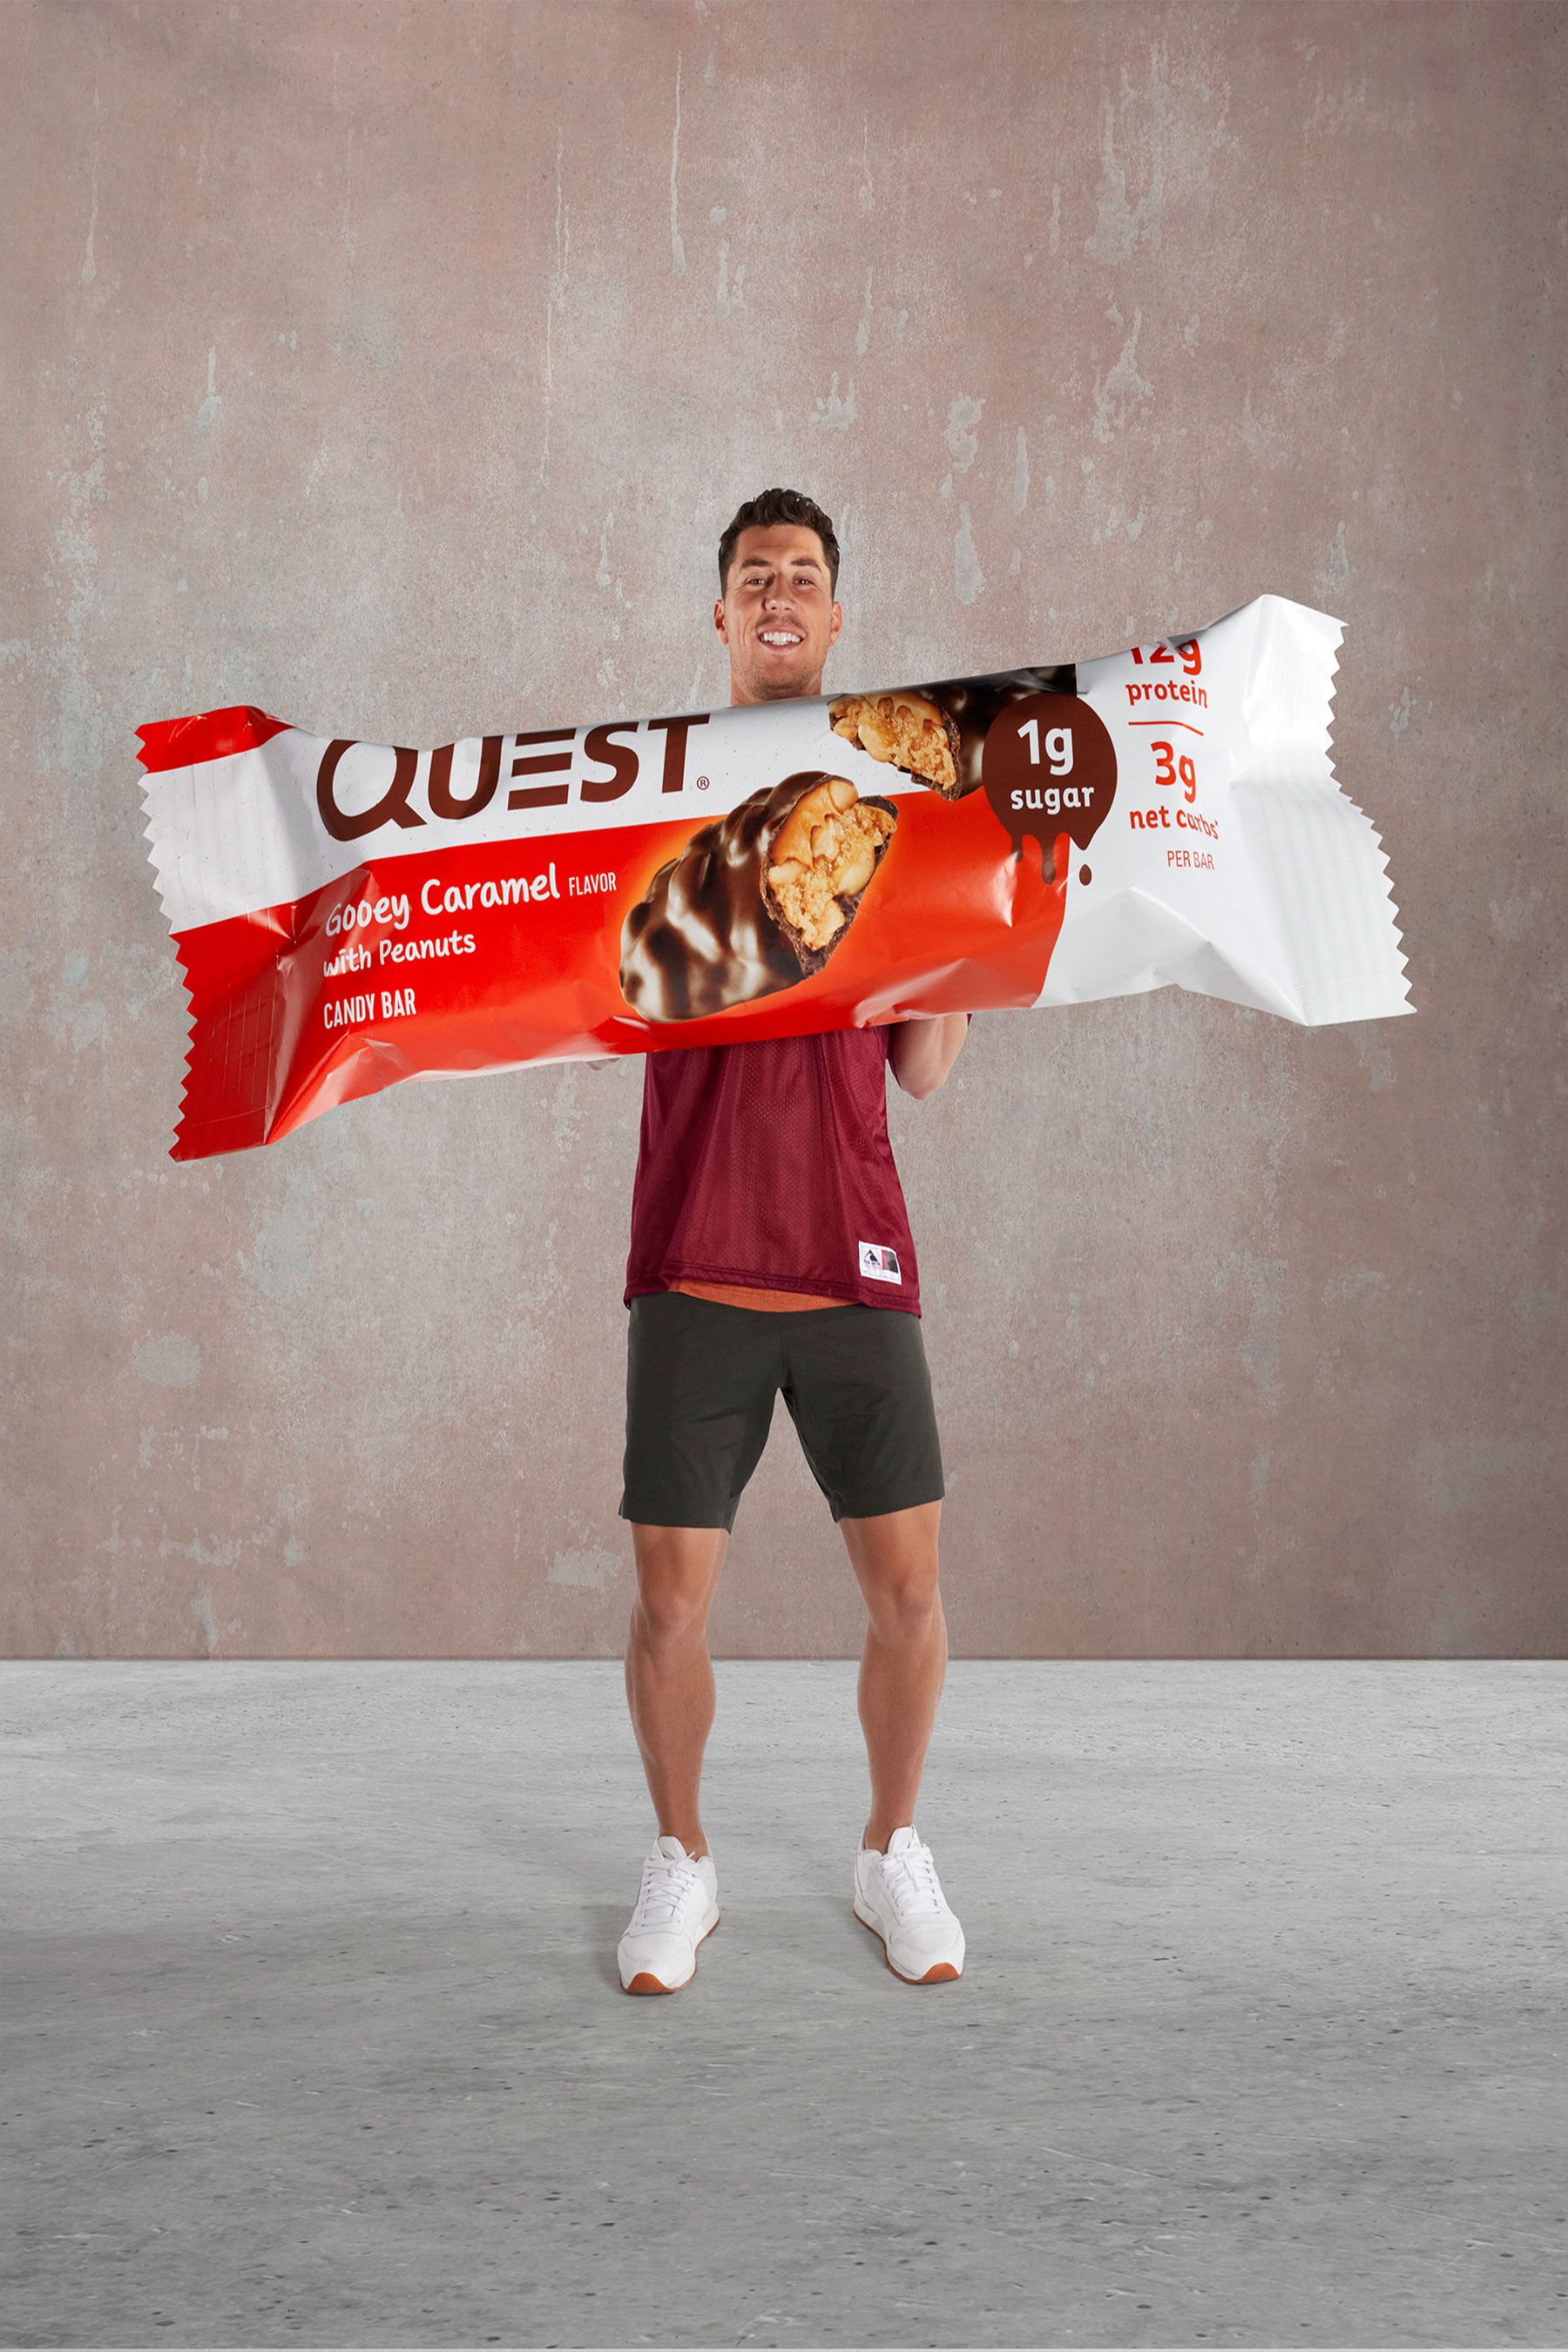 Quest® Brand launches first national TV campaign to empower people on their personal quests